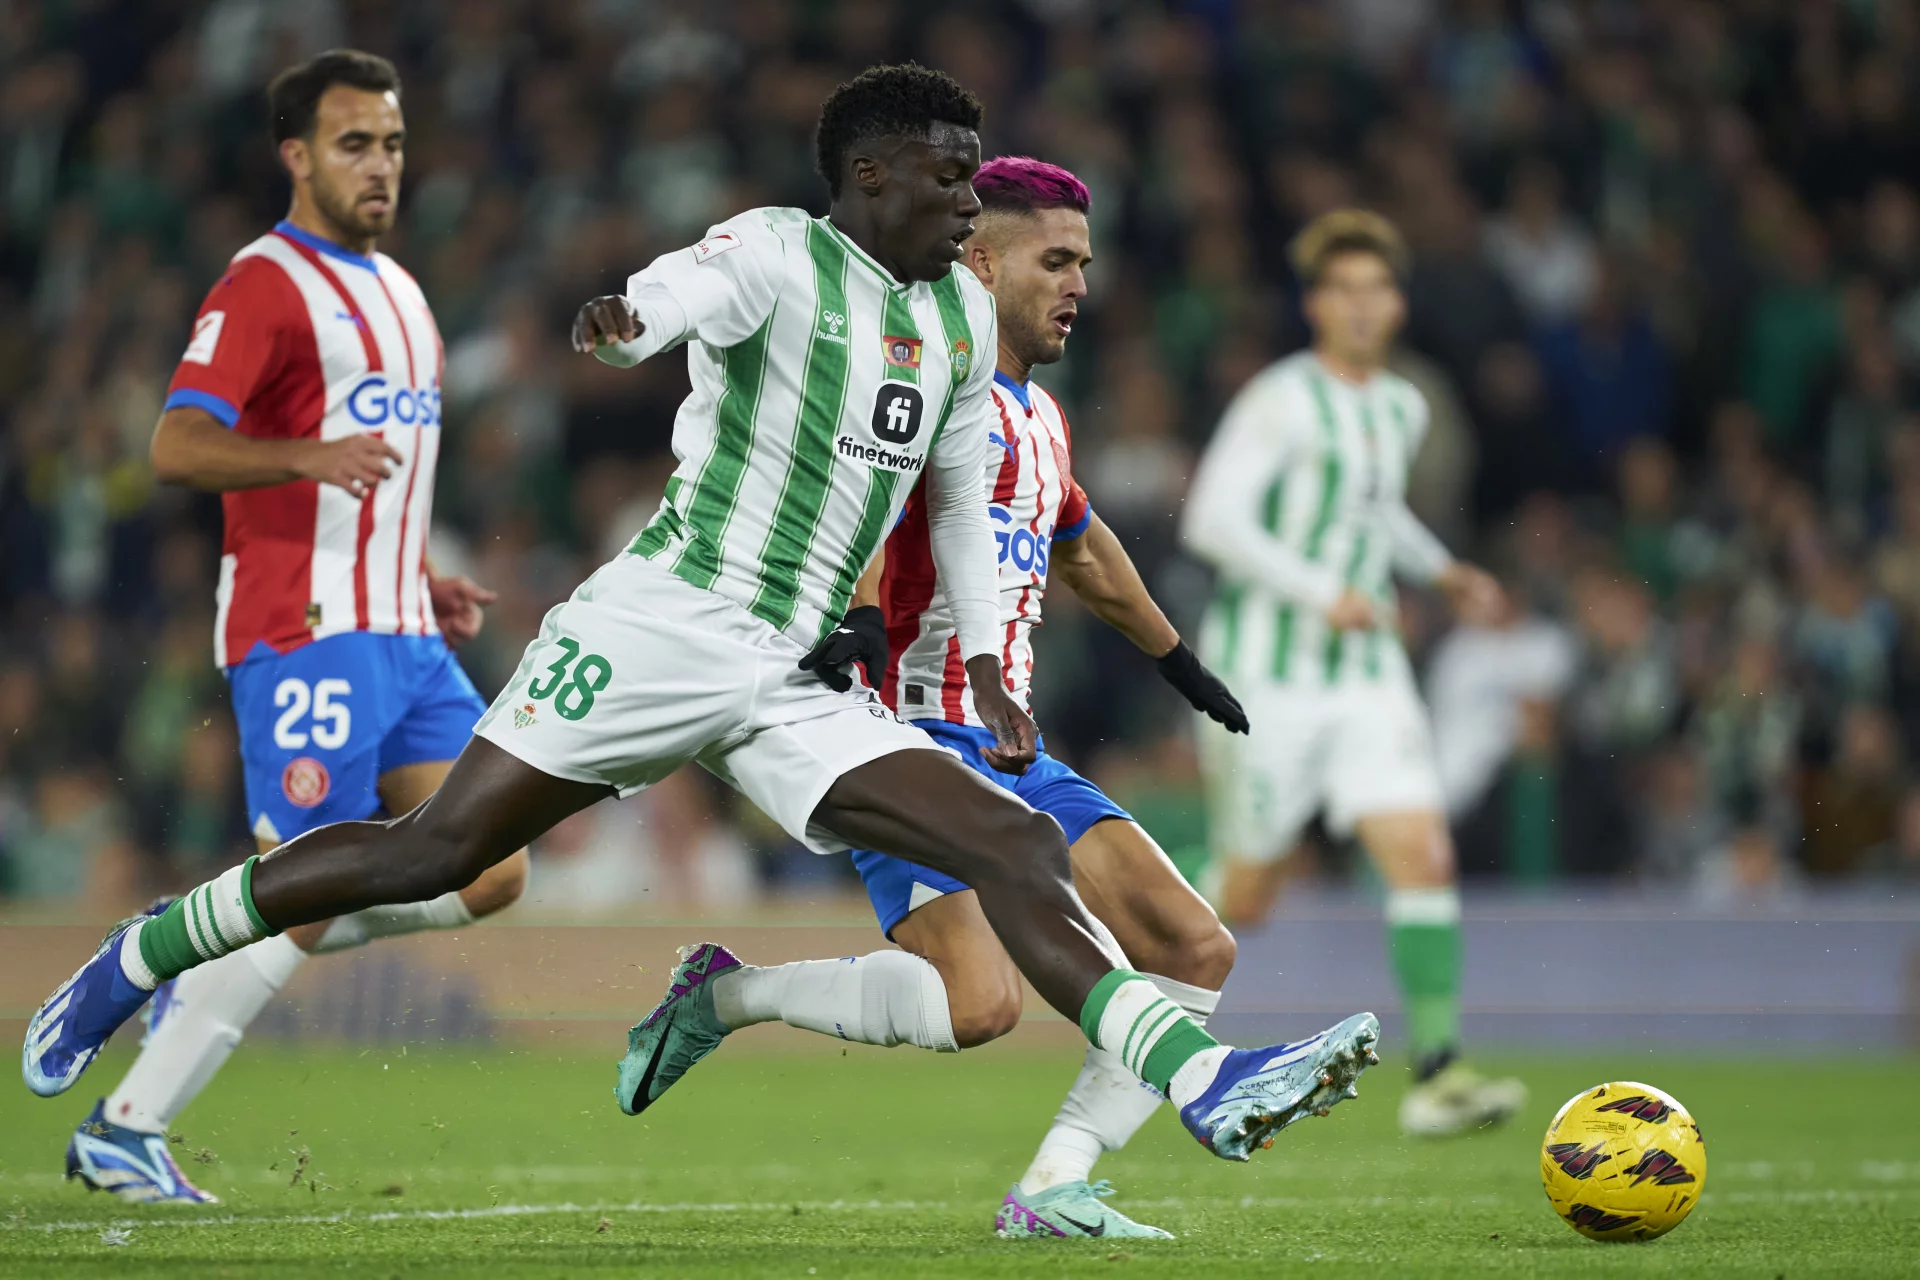 MATCH REPORT  Real Betis draw against Girona FC (1-1) - Real Betis Balompié